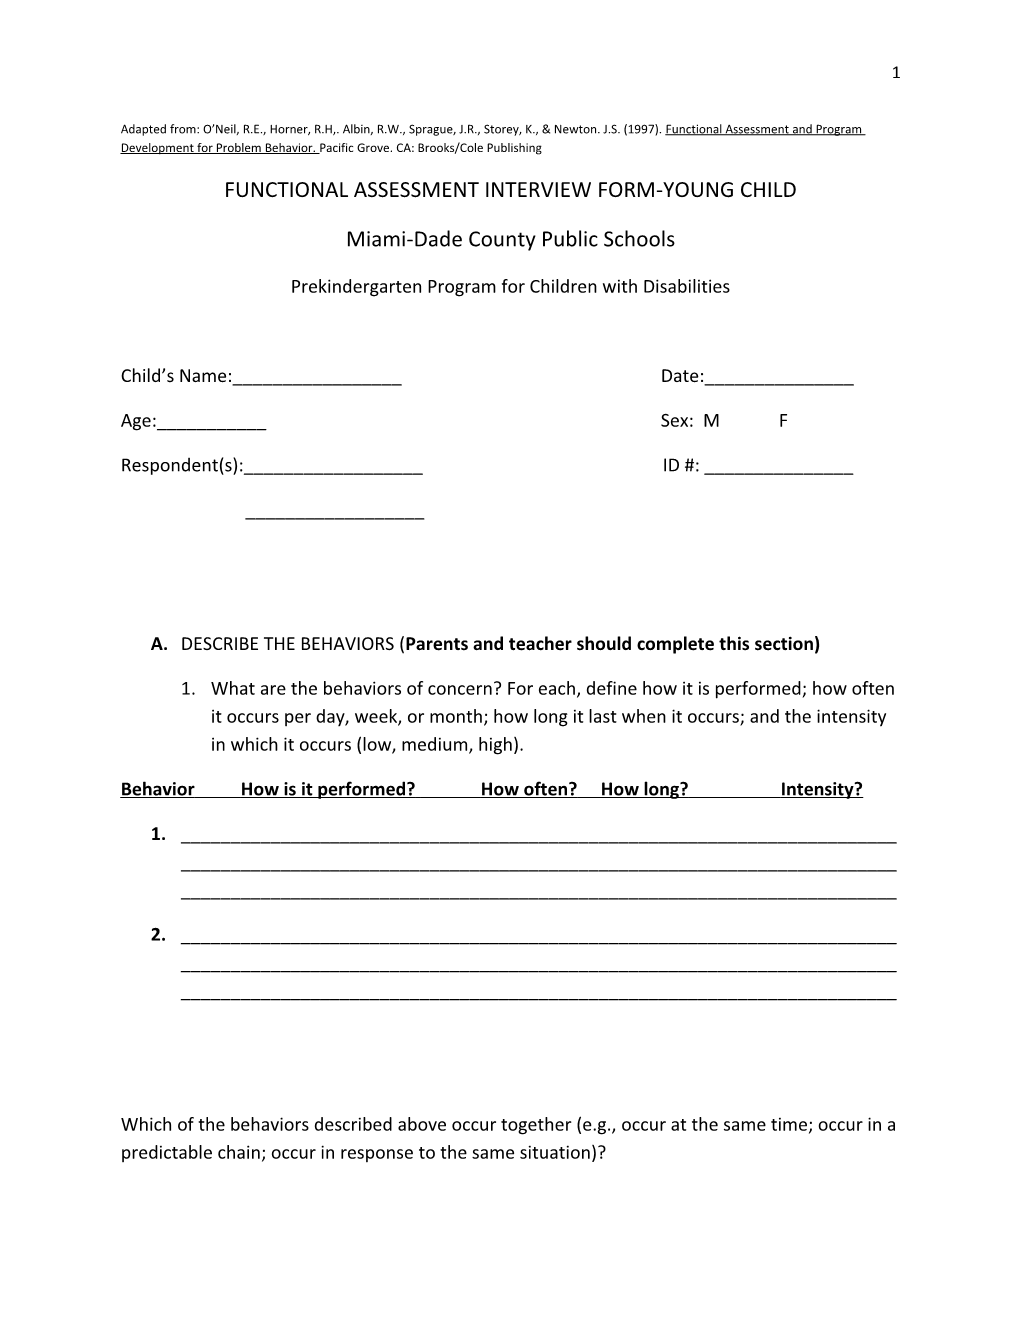 Functional Assessment Interview Form-Young Child